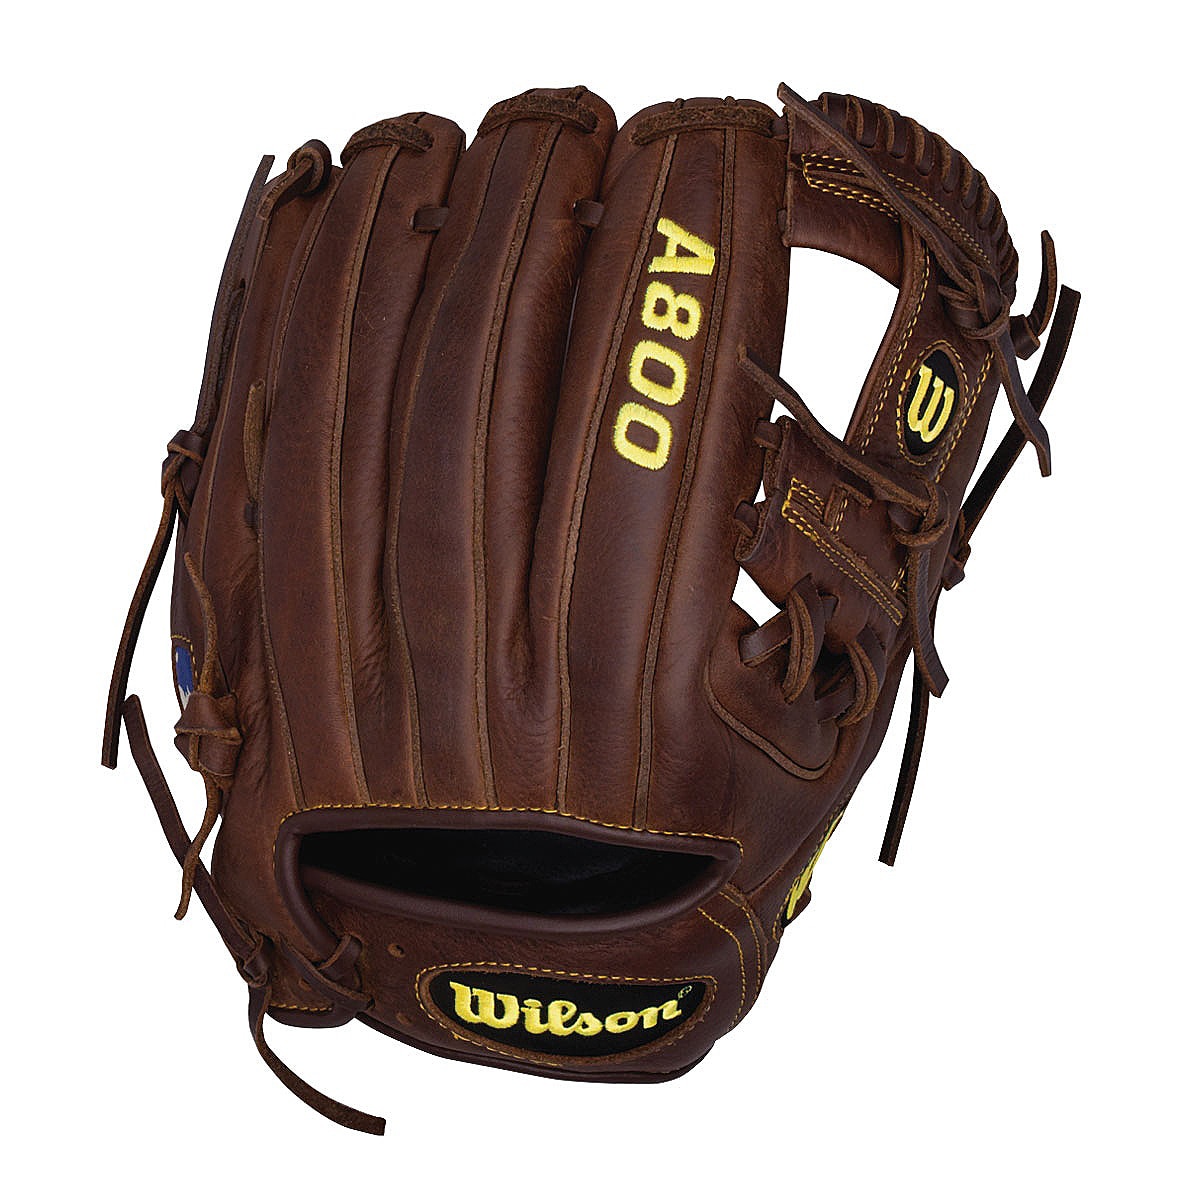 Wilson A800 12 Fist Base Glove Lht (BrownDimensions 11 x 7 x 4.75Weight 1.8 lbs 121B ModelSingle Post Web2x Palm Construction to reinforce the pocketExclusive Cheyenne Penny Leather is game ready and durableFull Leather Construction for a better break i